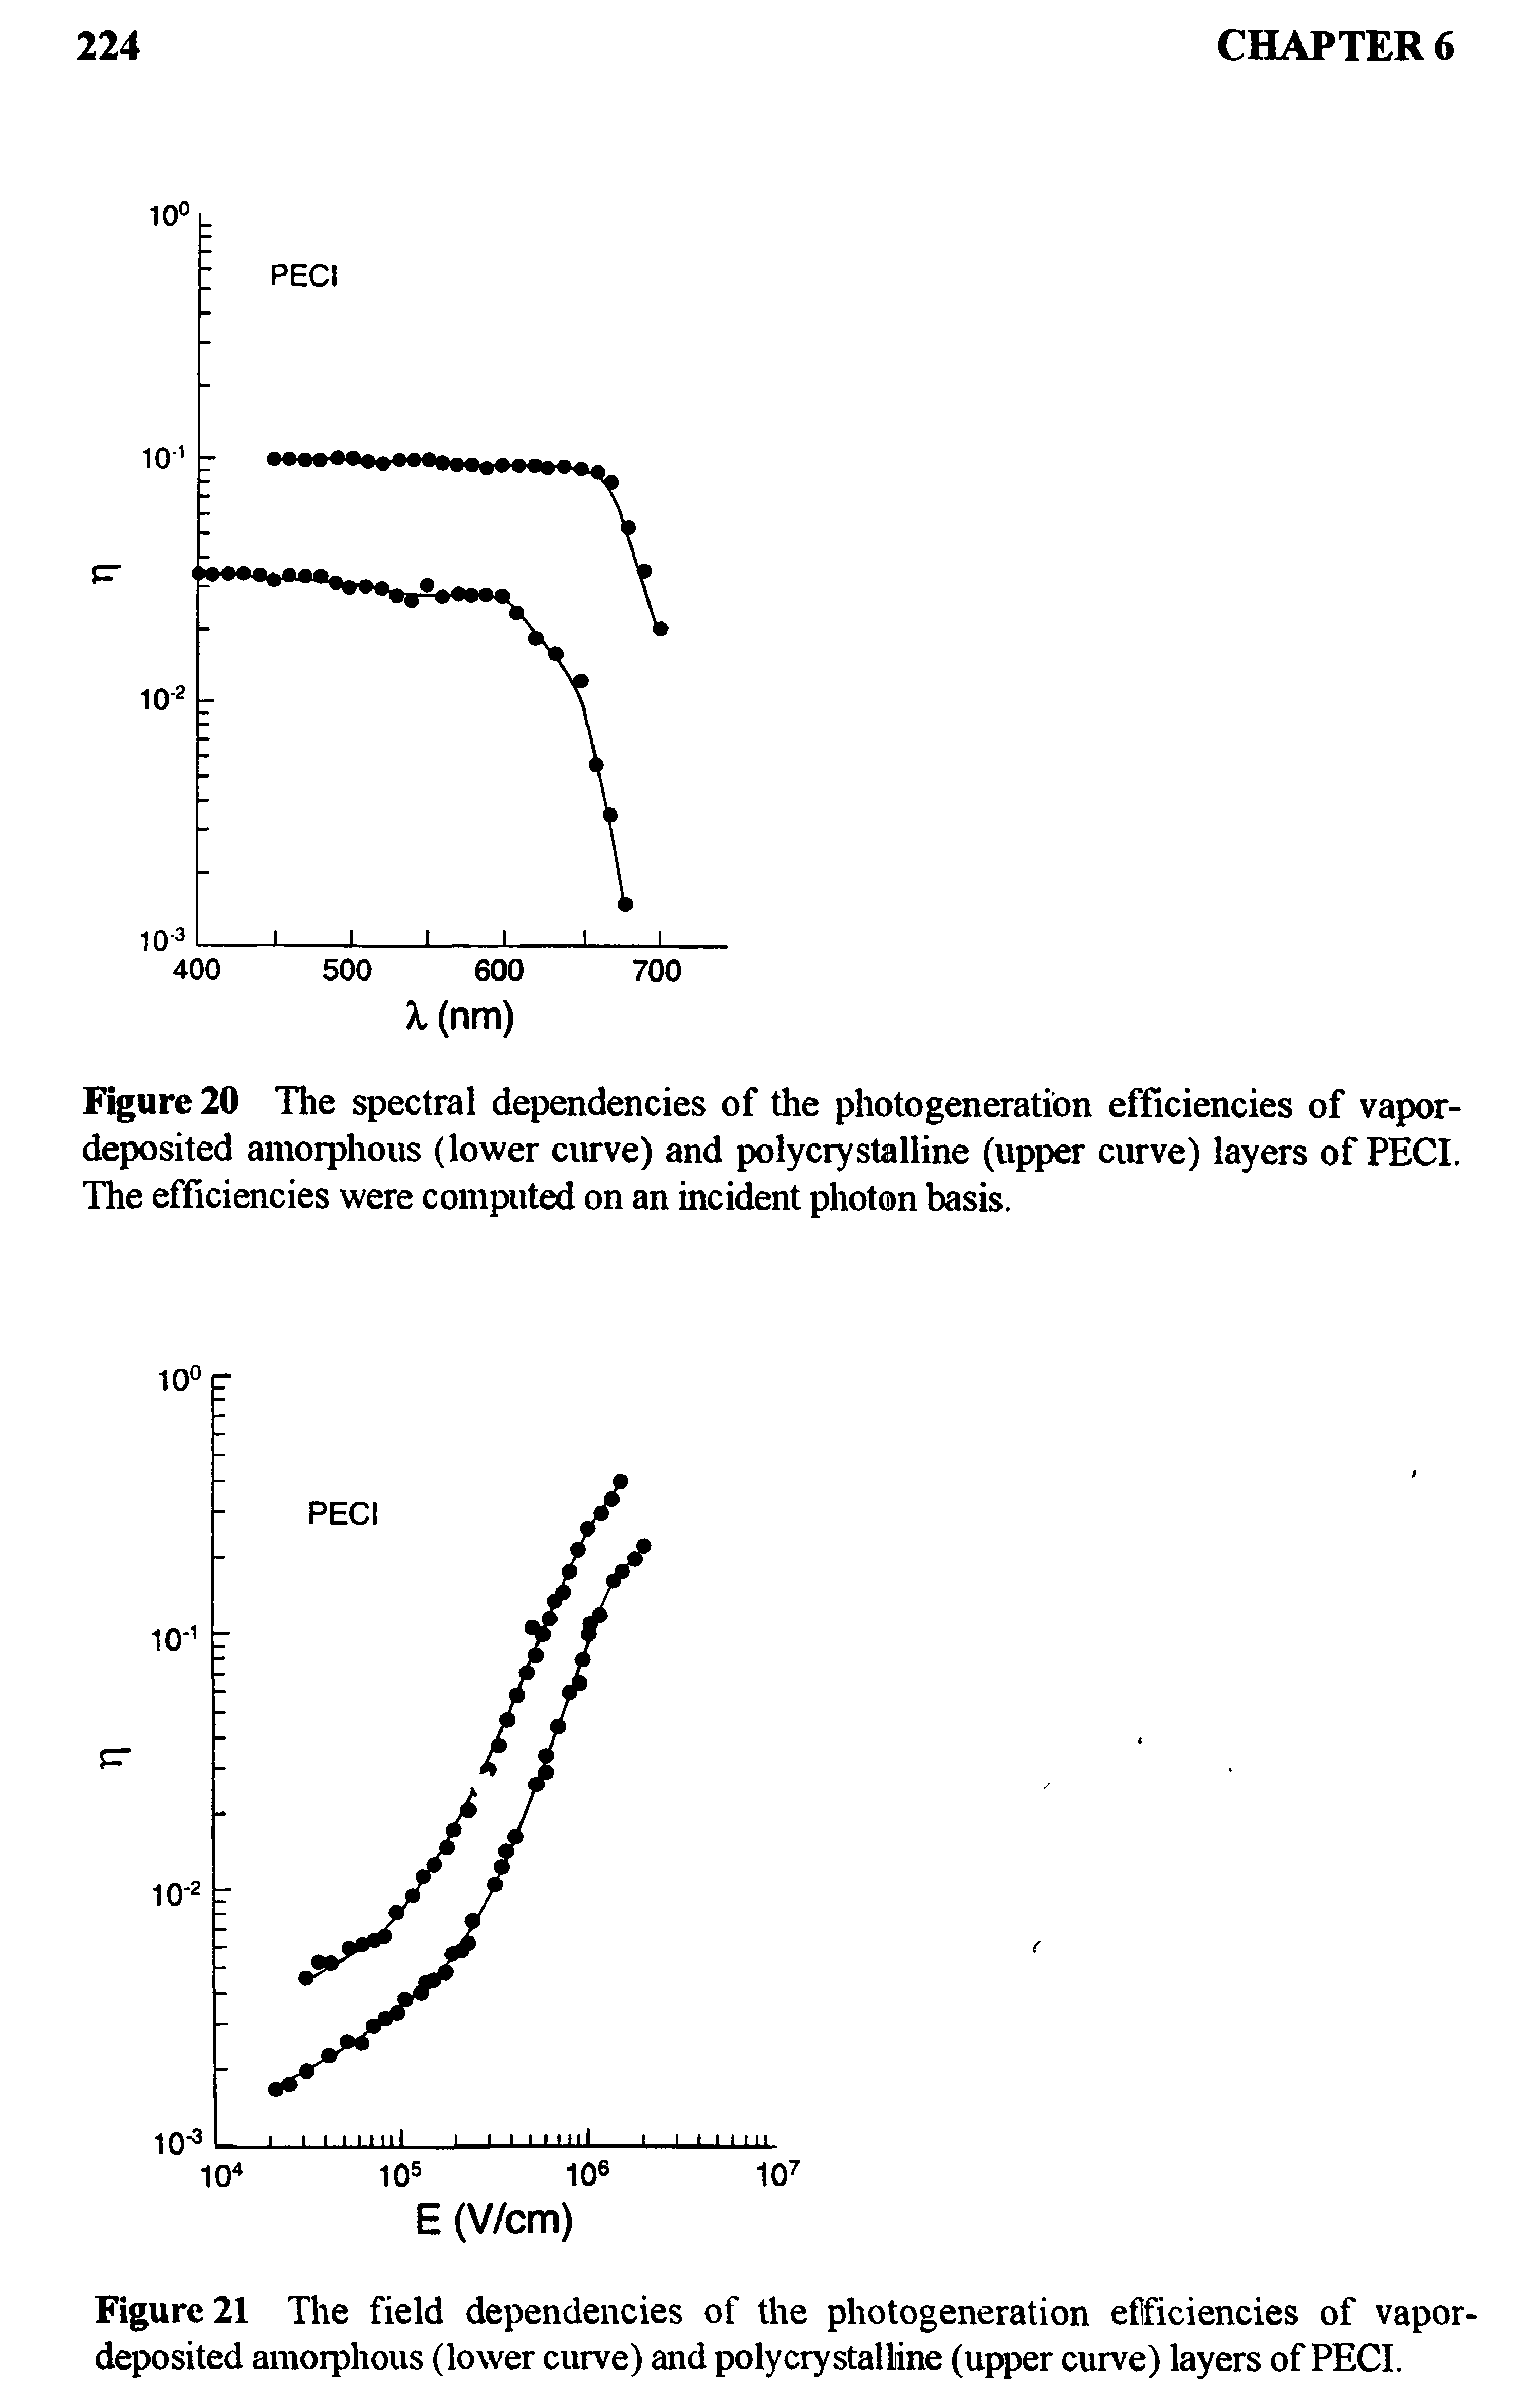 Figure 20 The spectral dependencies of the photogeneration efficiencies of vapor-deposited amorphous (lower curve) and poly crystalline (upper curve) layers of PECI. The efficiencies were computed on an incident photon basis.